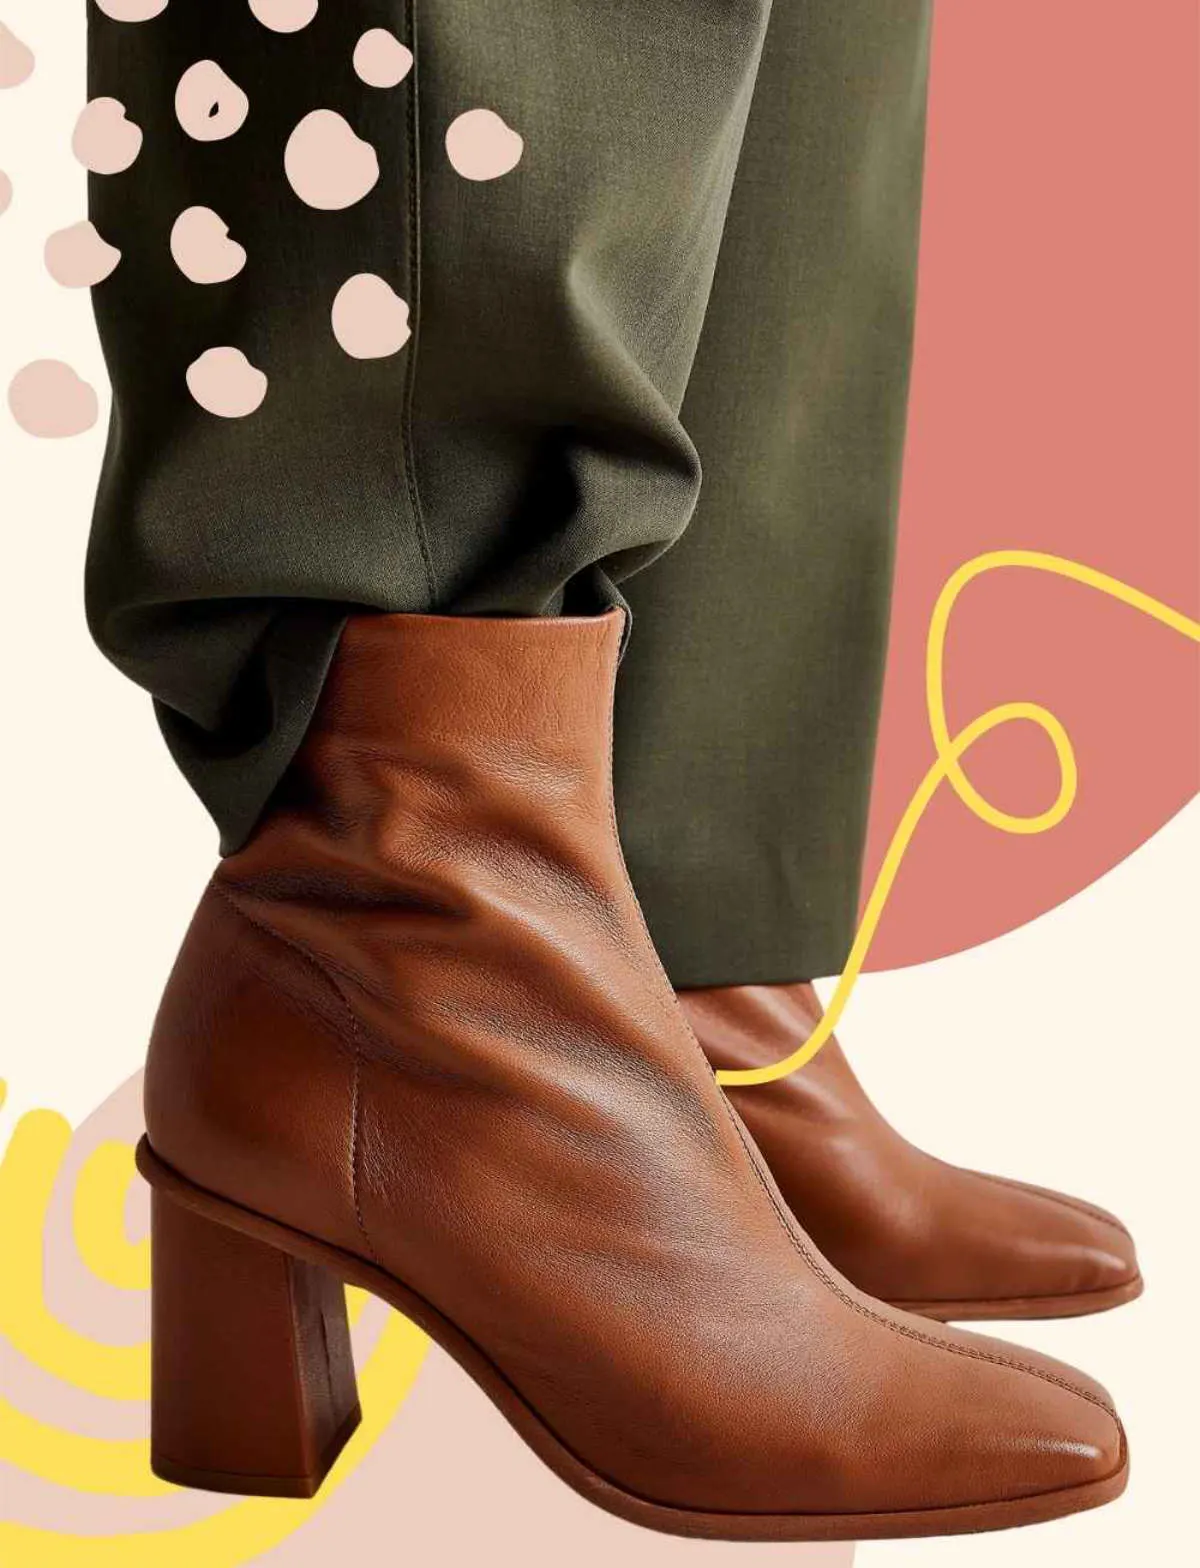 Here's How to Nail the Ankle Boots and Jeans Look Every Single Time